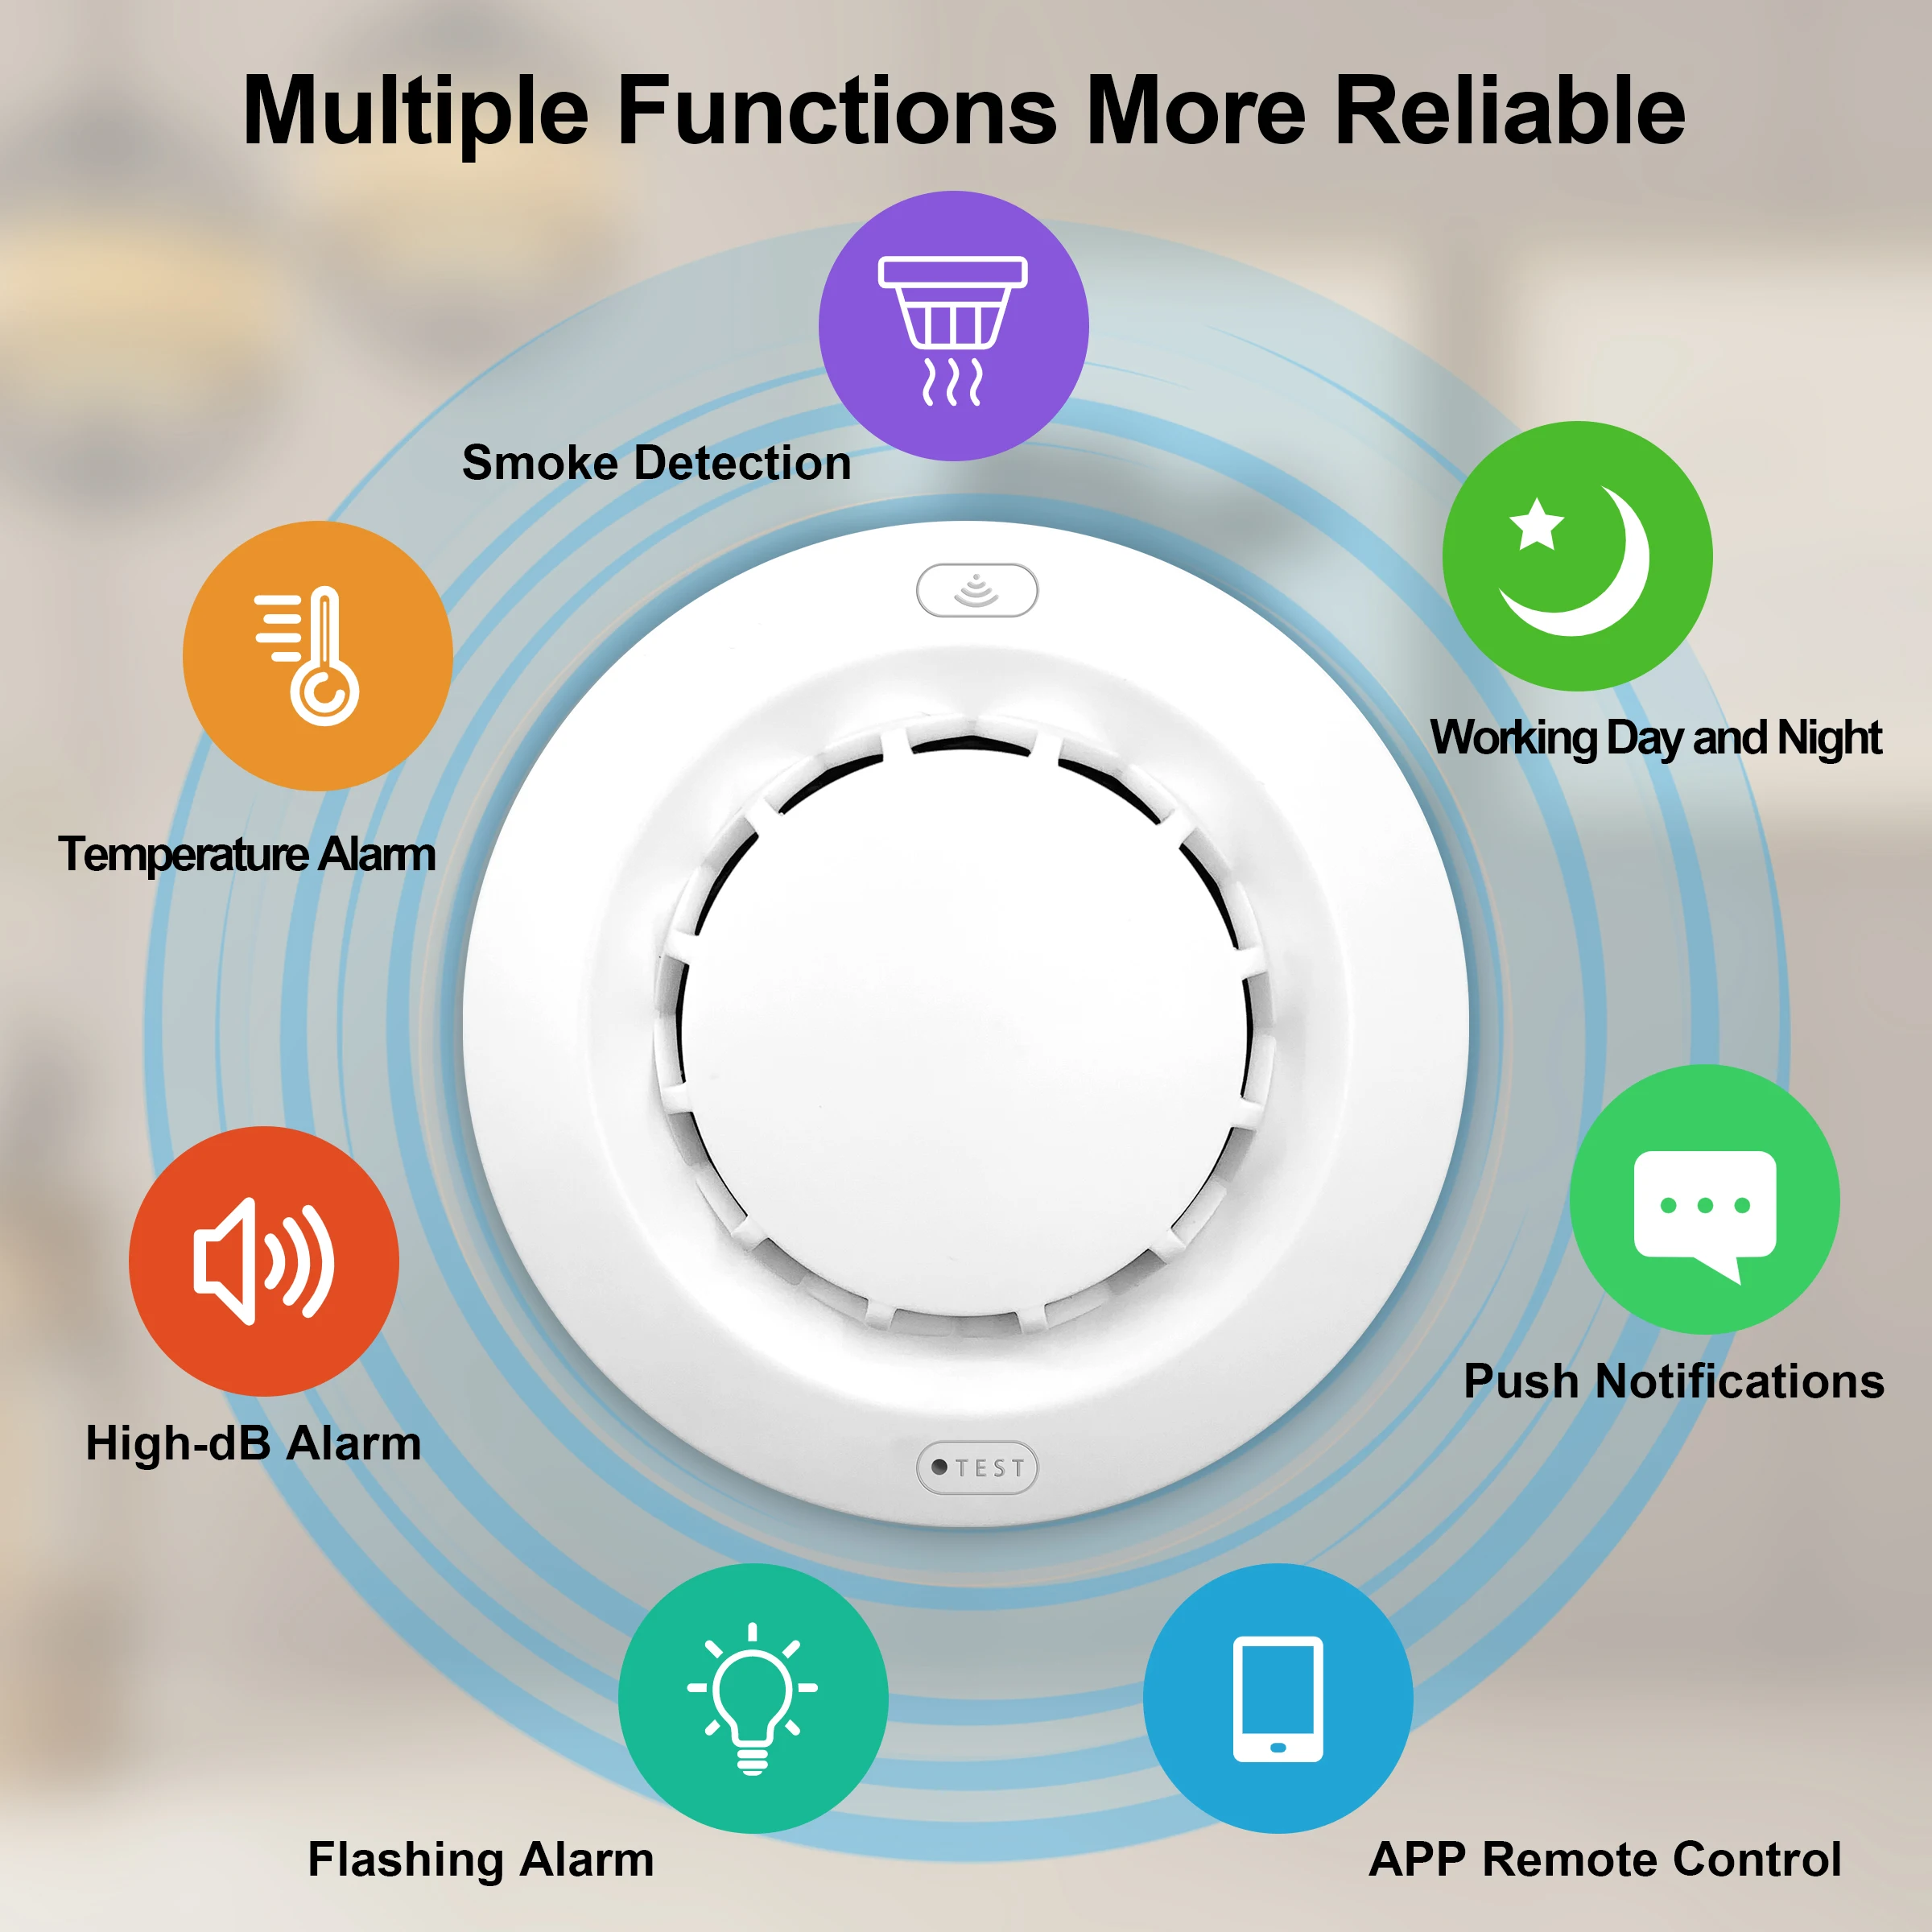 girier tuya wifi smart smoke fire alarm detector sensor with battery operated for home security system works with smart life app free global shipping